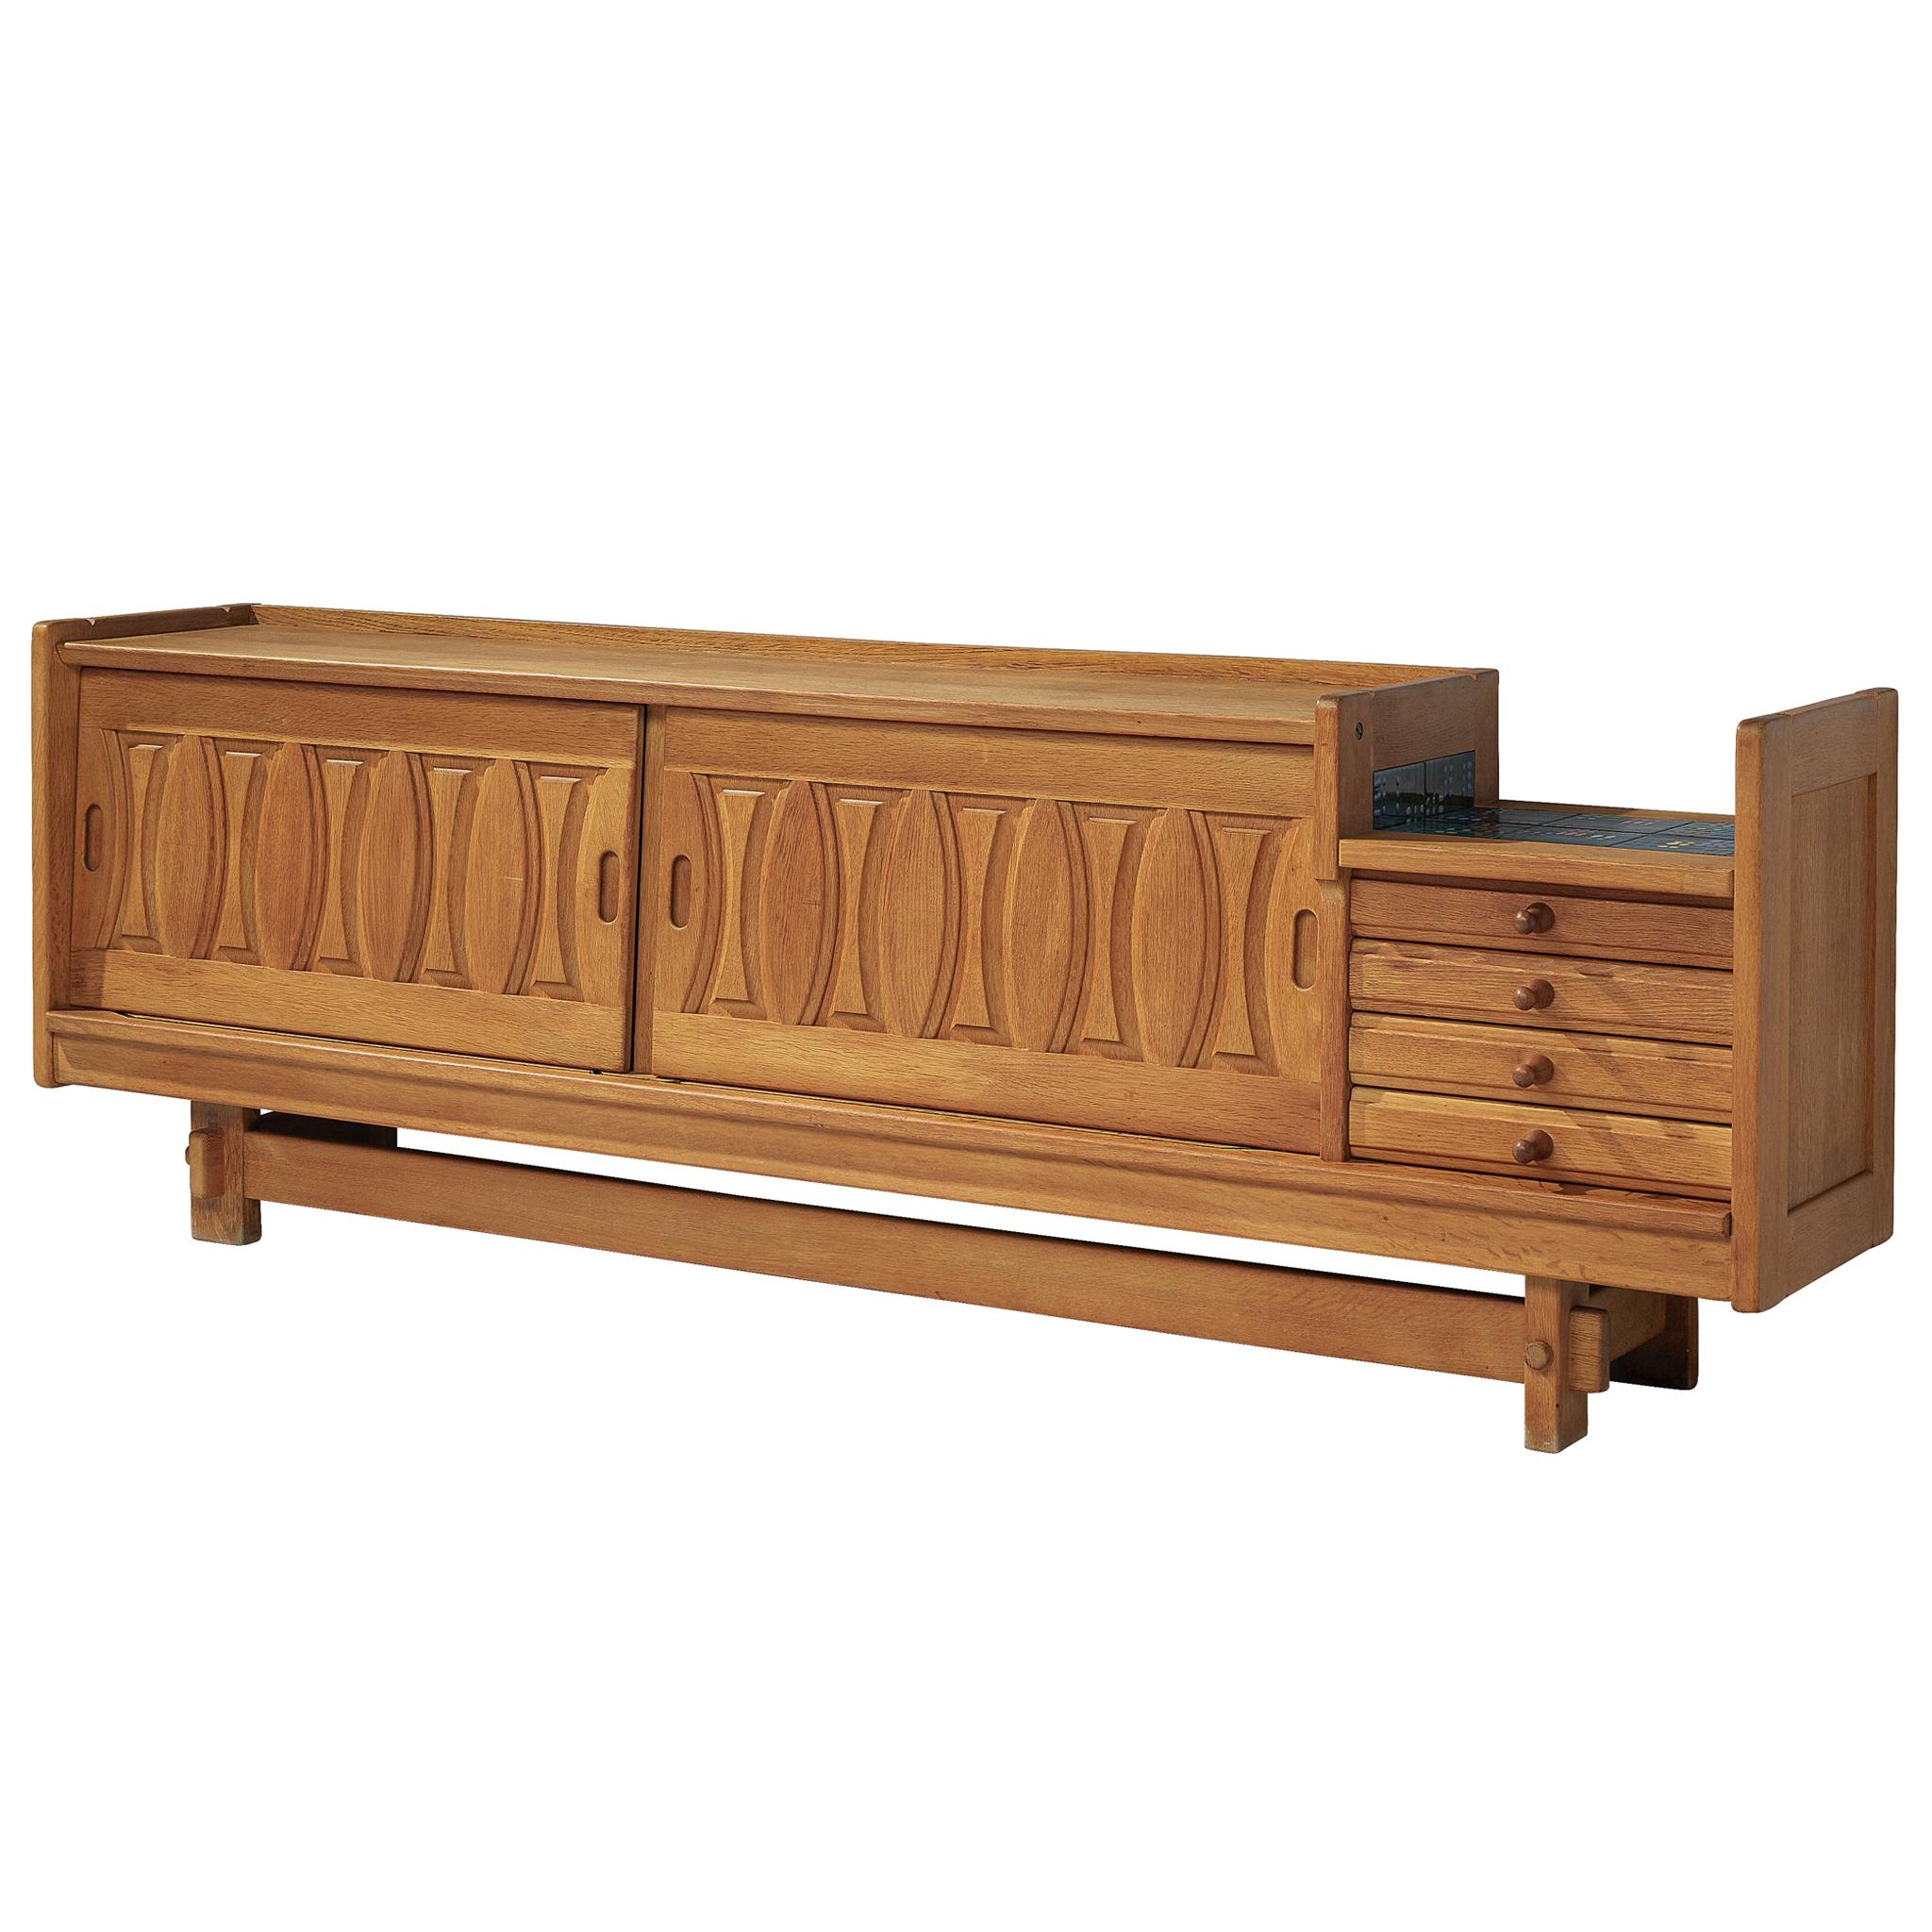 Guillerme et Chambron Sideboard in Oak with Ceramics